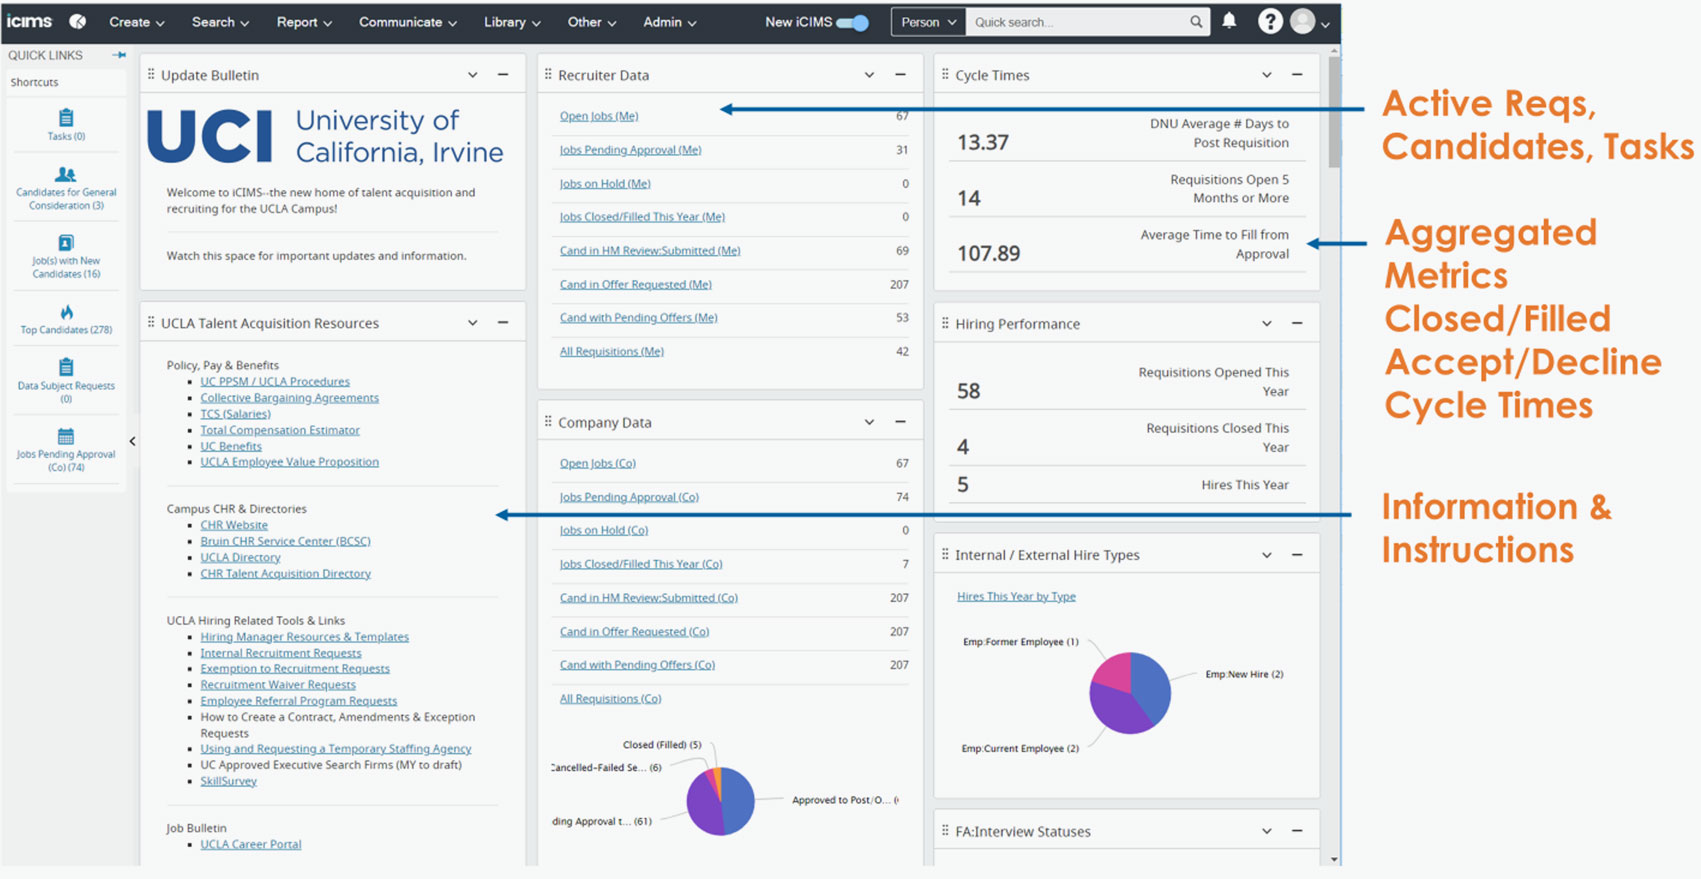 The iCIMS Dashboard